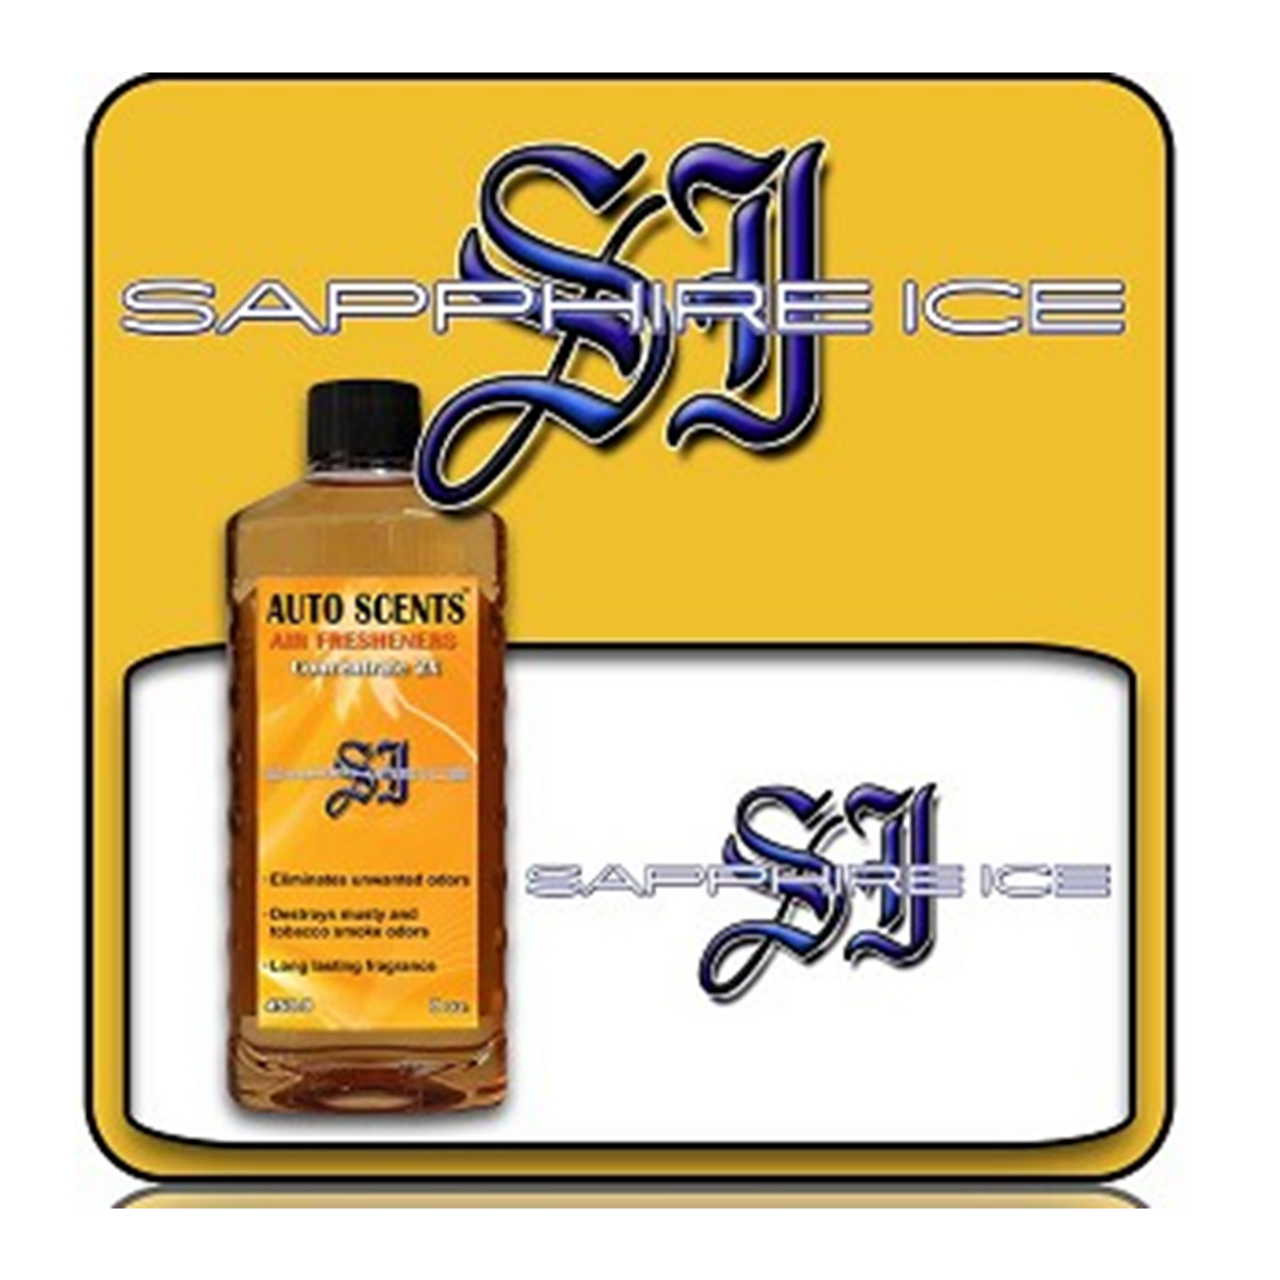 Sapphire Ice Air Freshener Concentrate 8 oz